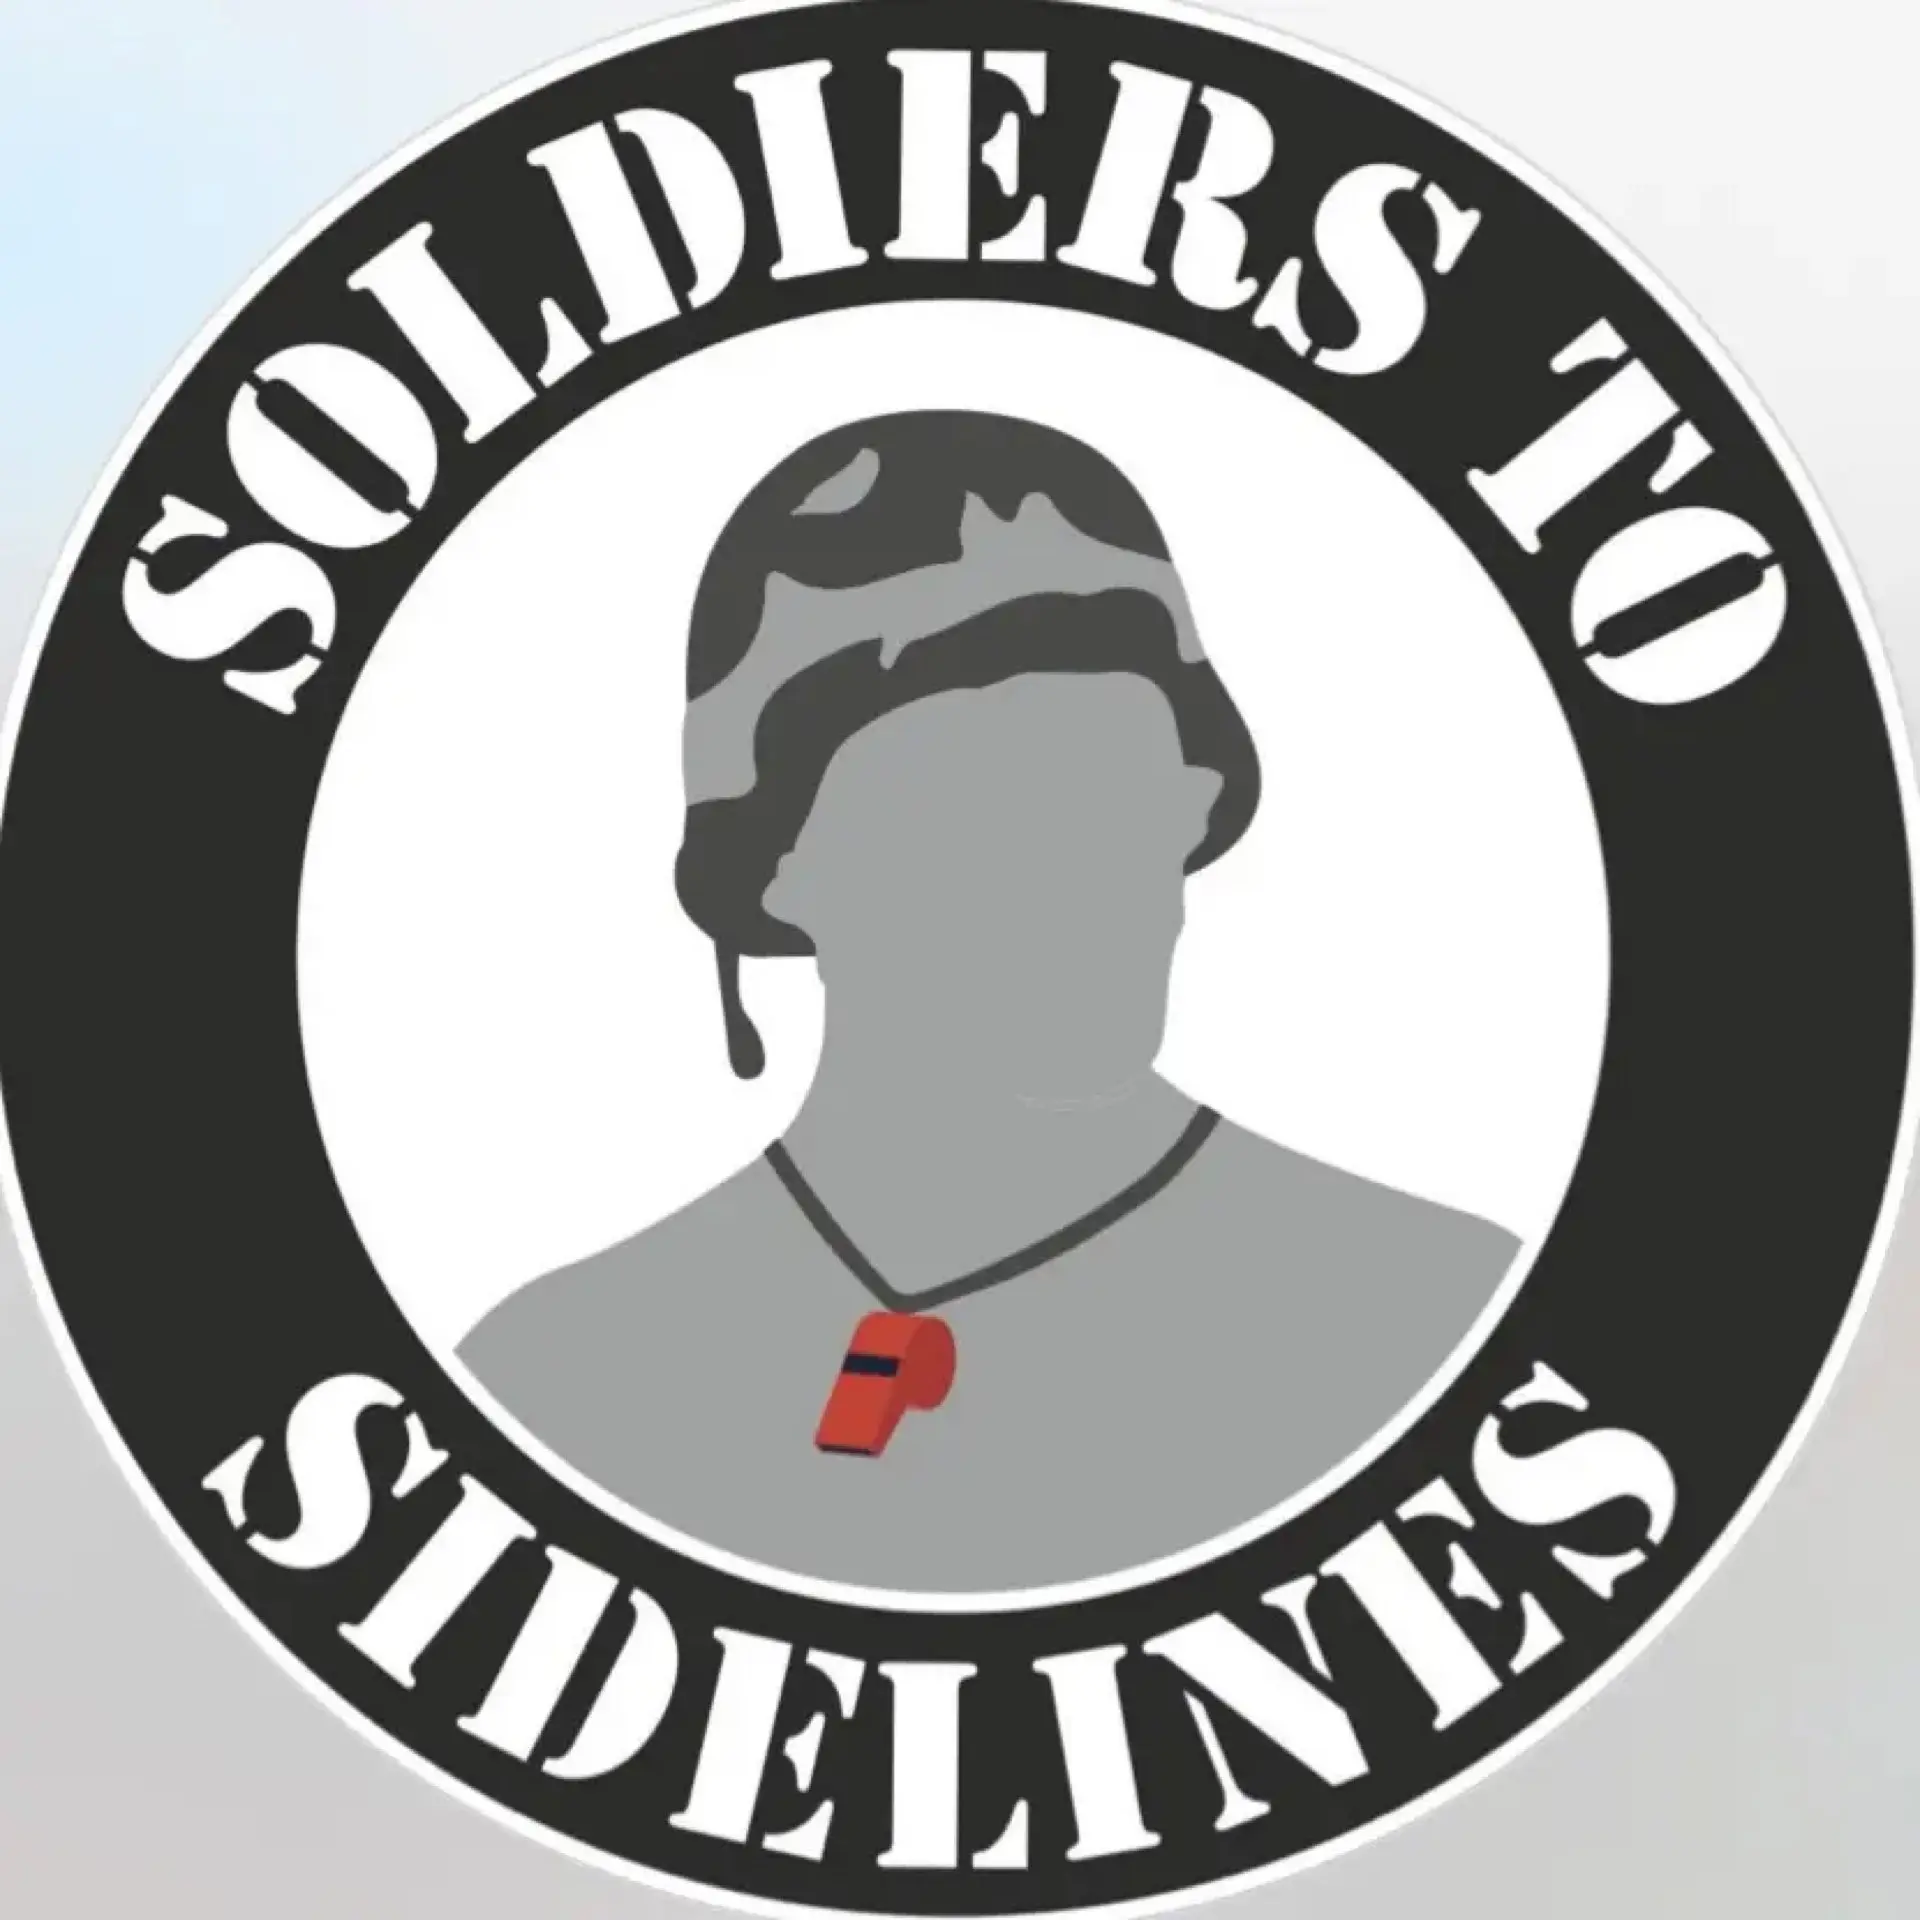 soldiers.to.sidelines.Demo